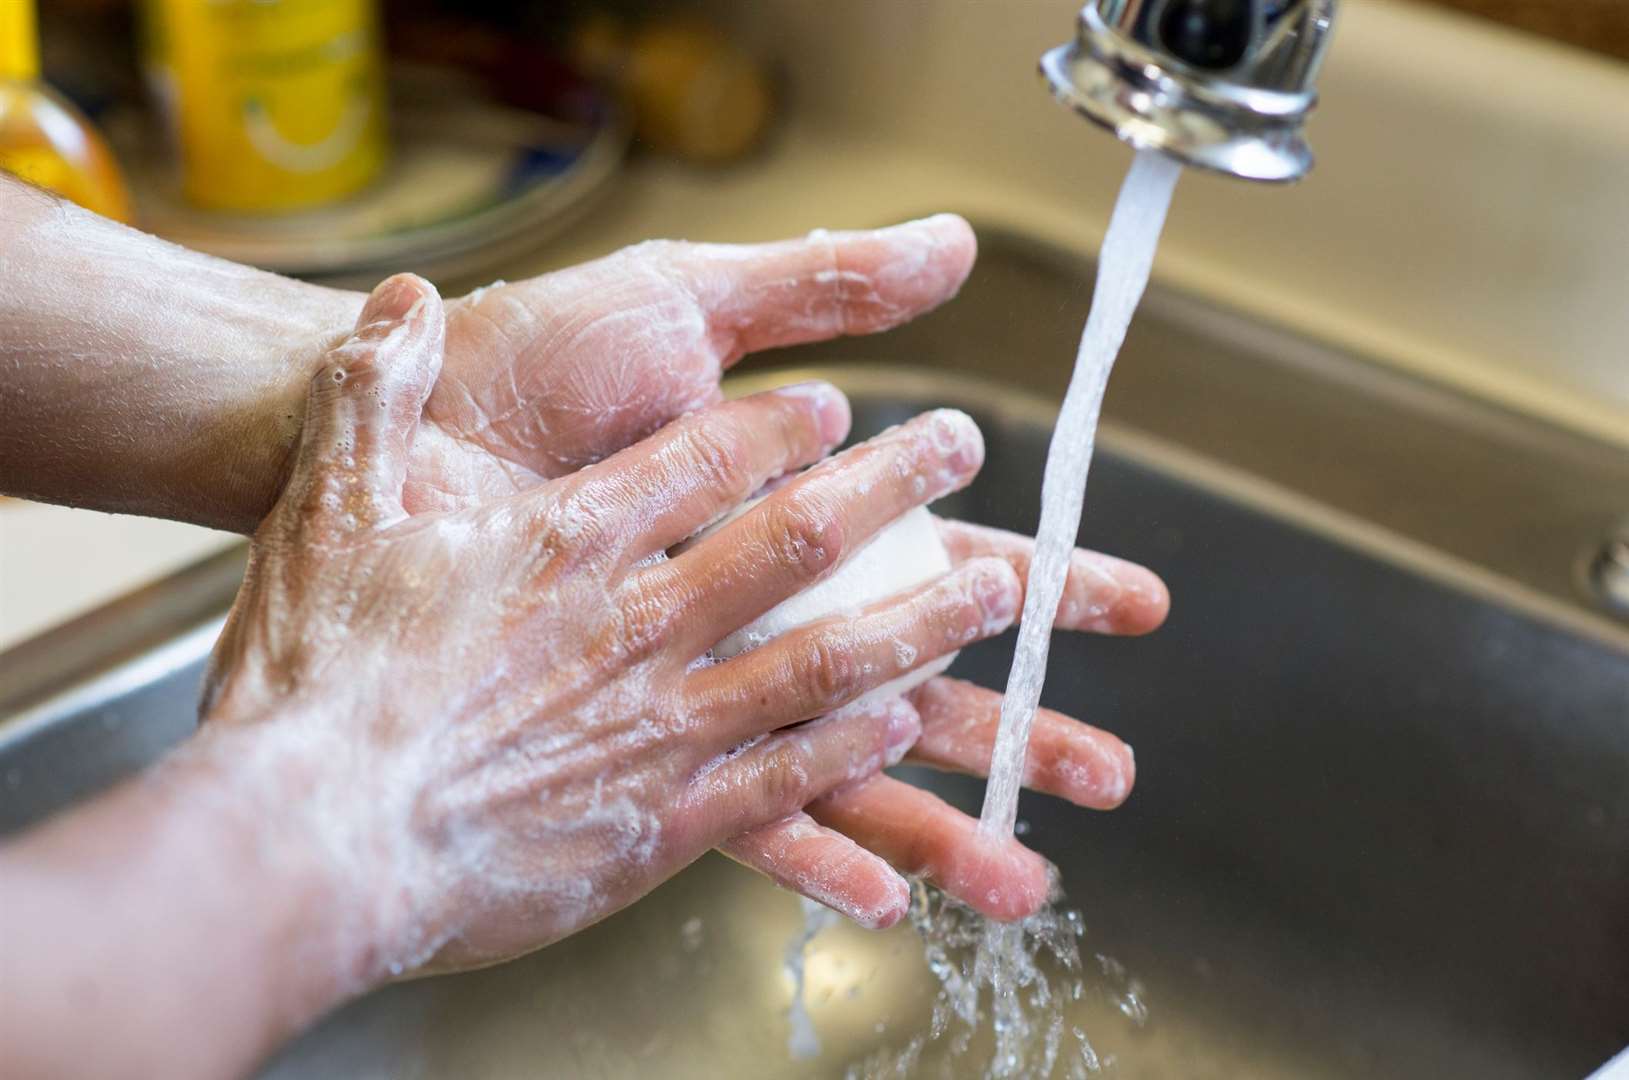 Self-contained toilets would need their own handwashing facilities. Image: Stock photo.